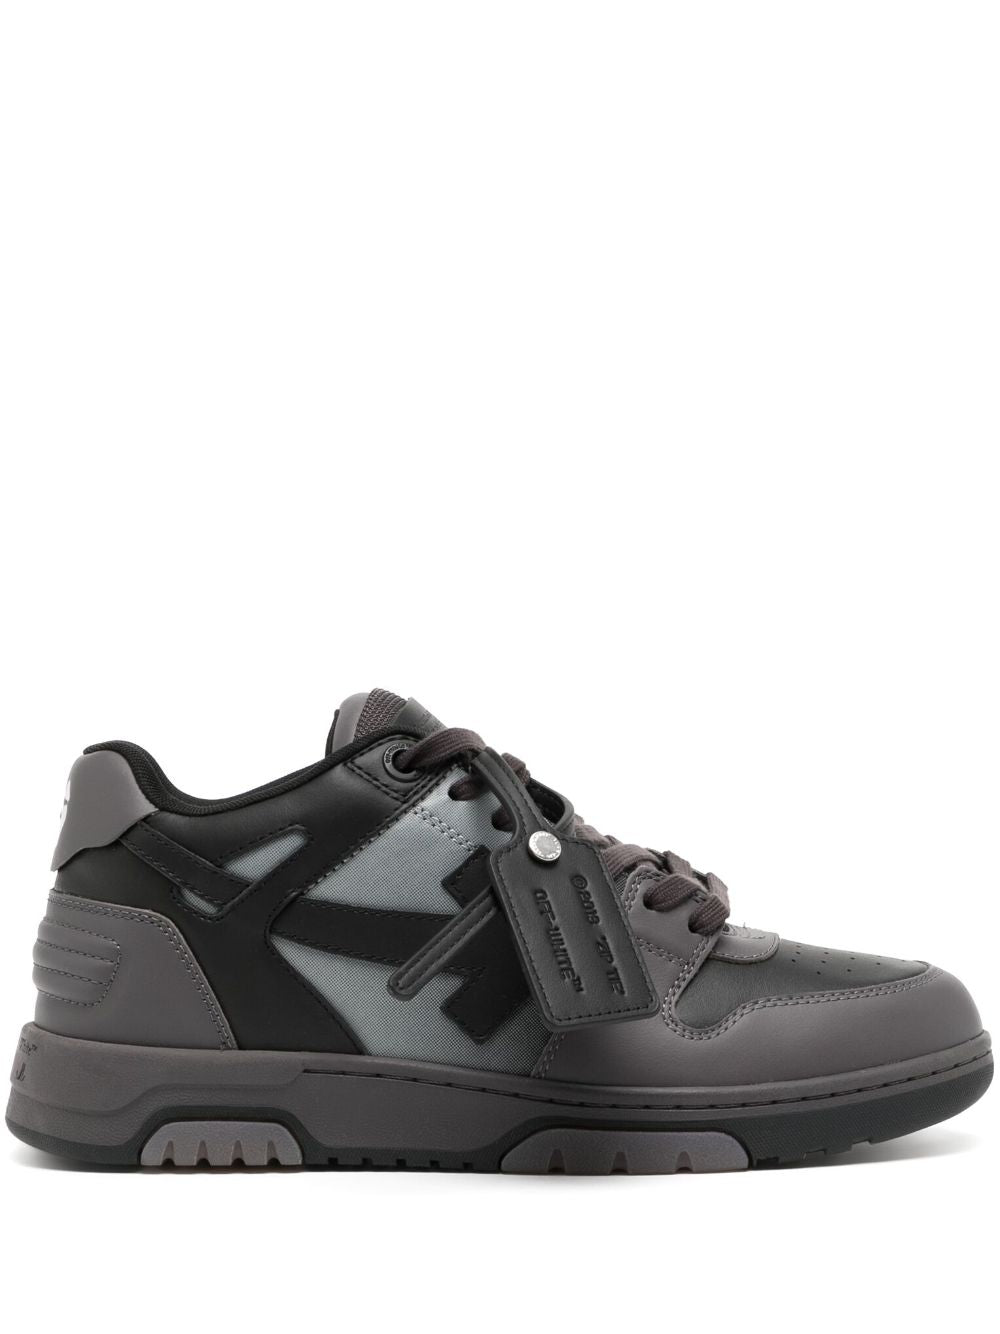 Off-White Out of Office Leather Gradient Black Trainers in Light Grey